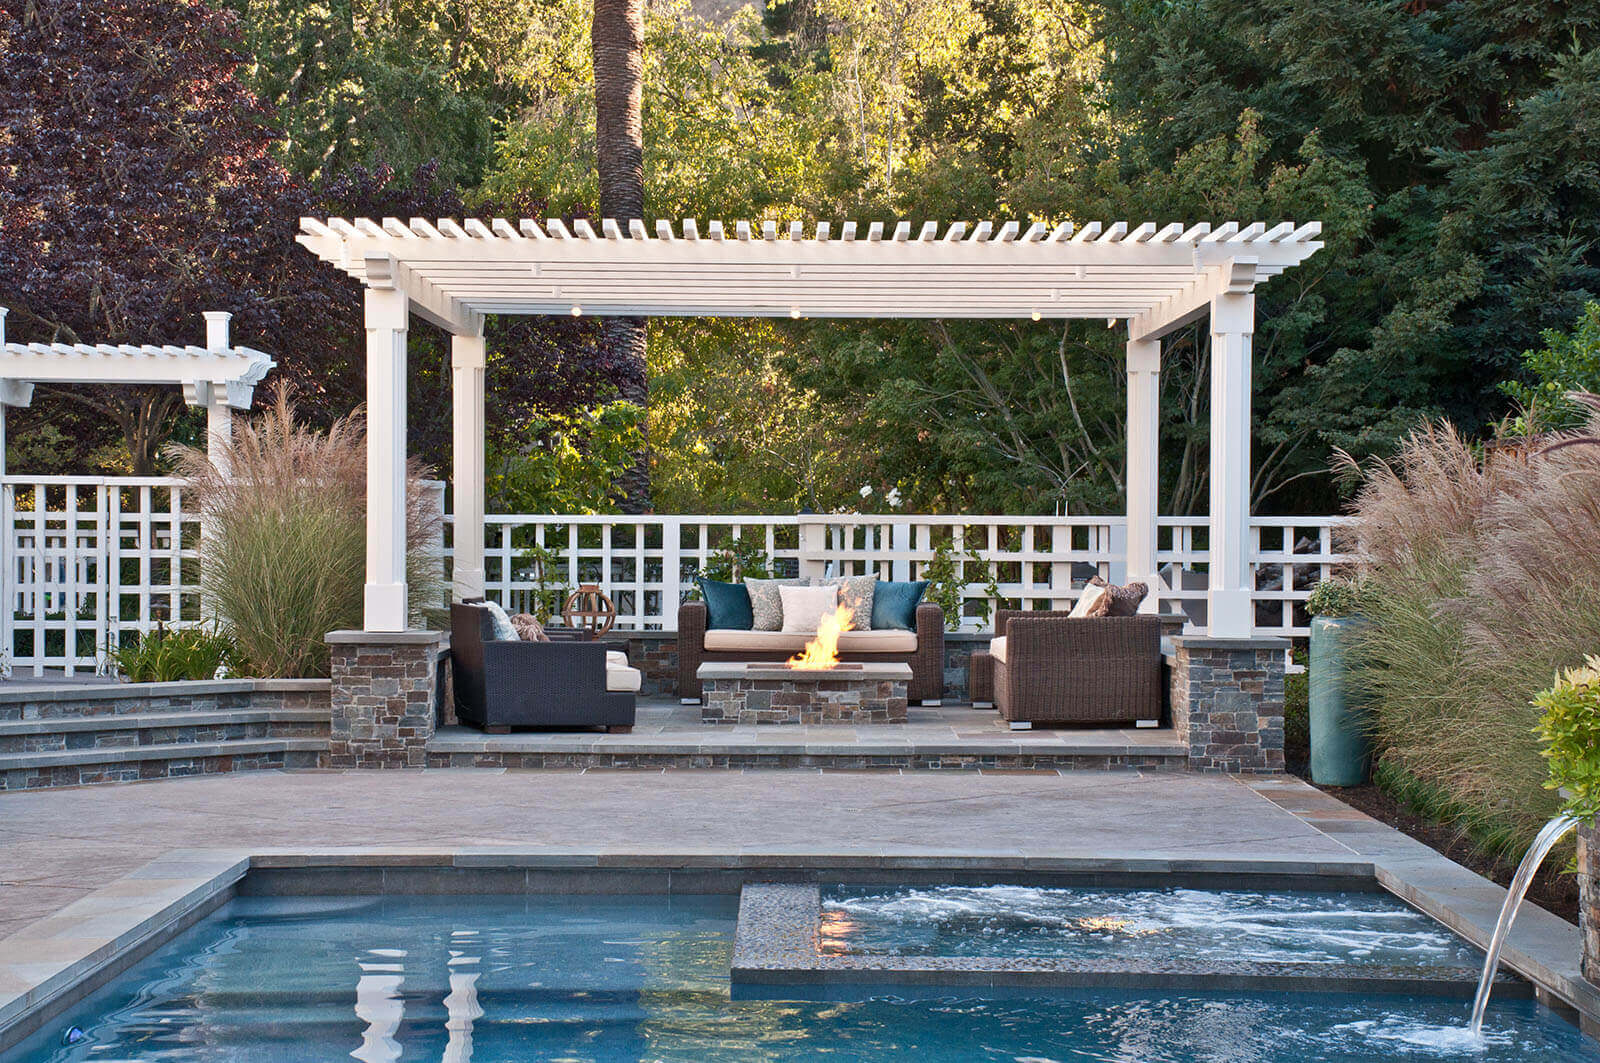 Pergola roofed staged patio with square, stone tile short fireplace with lounging furniture